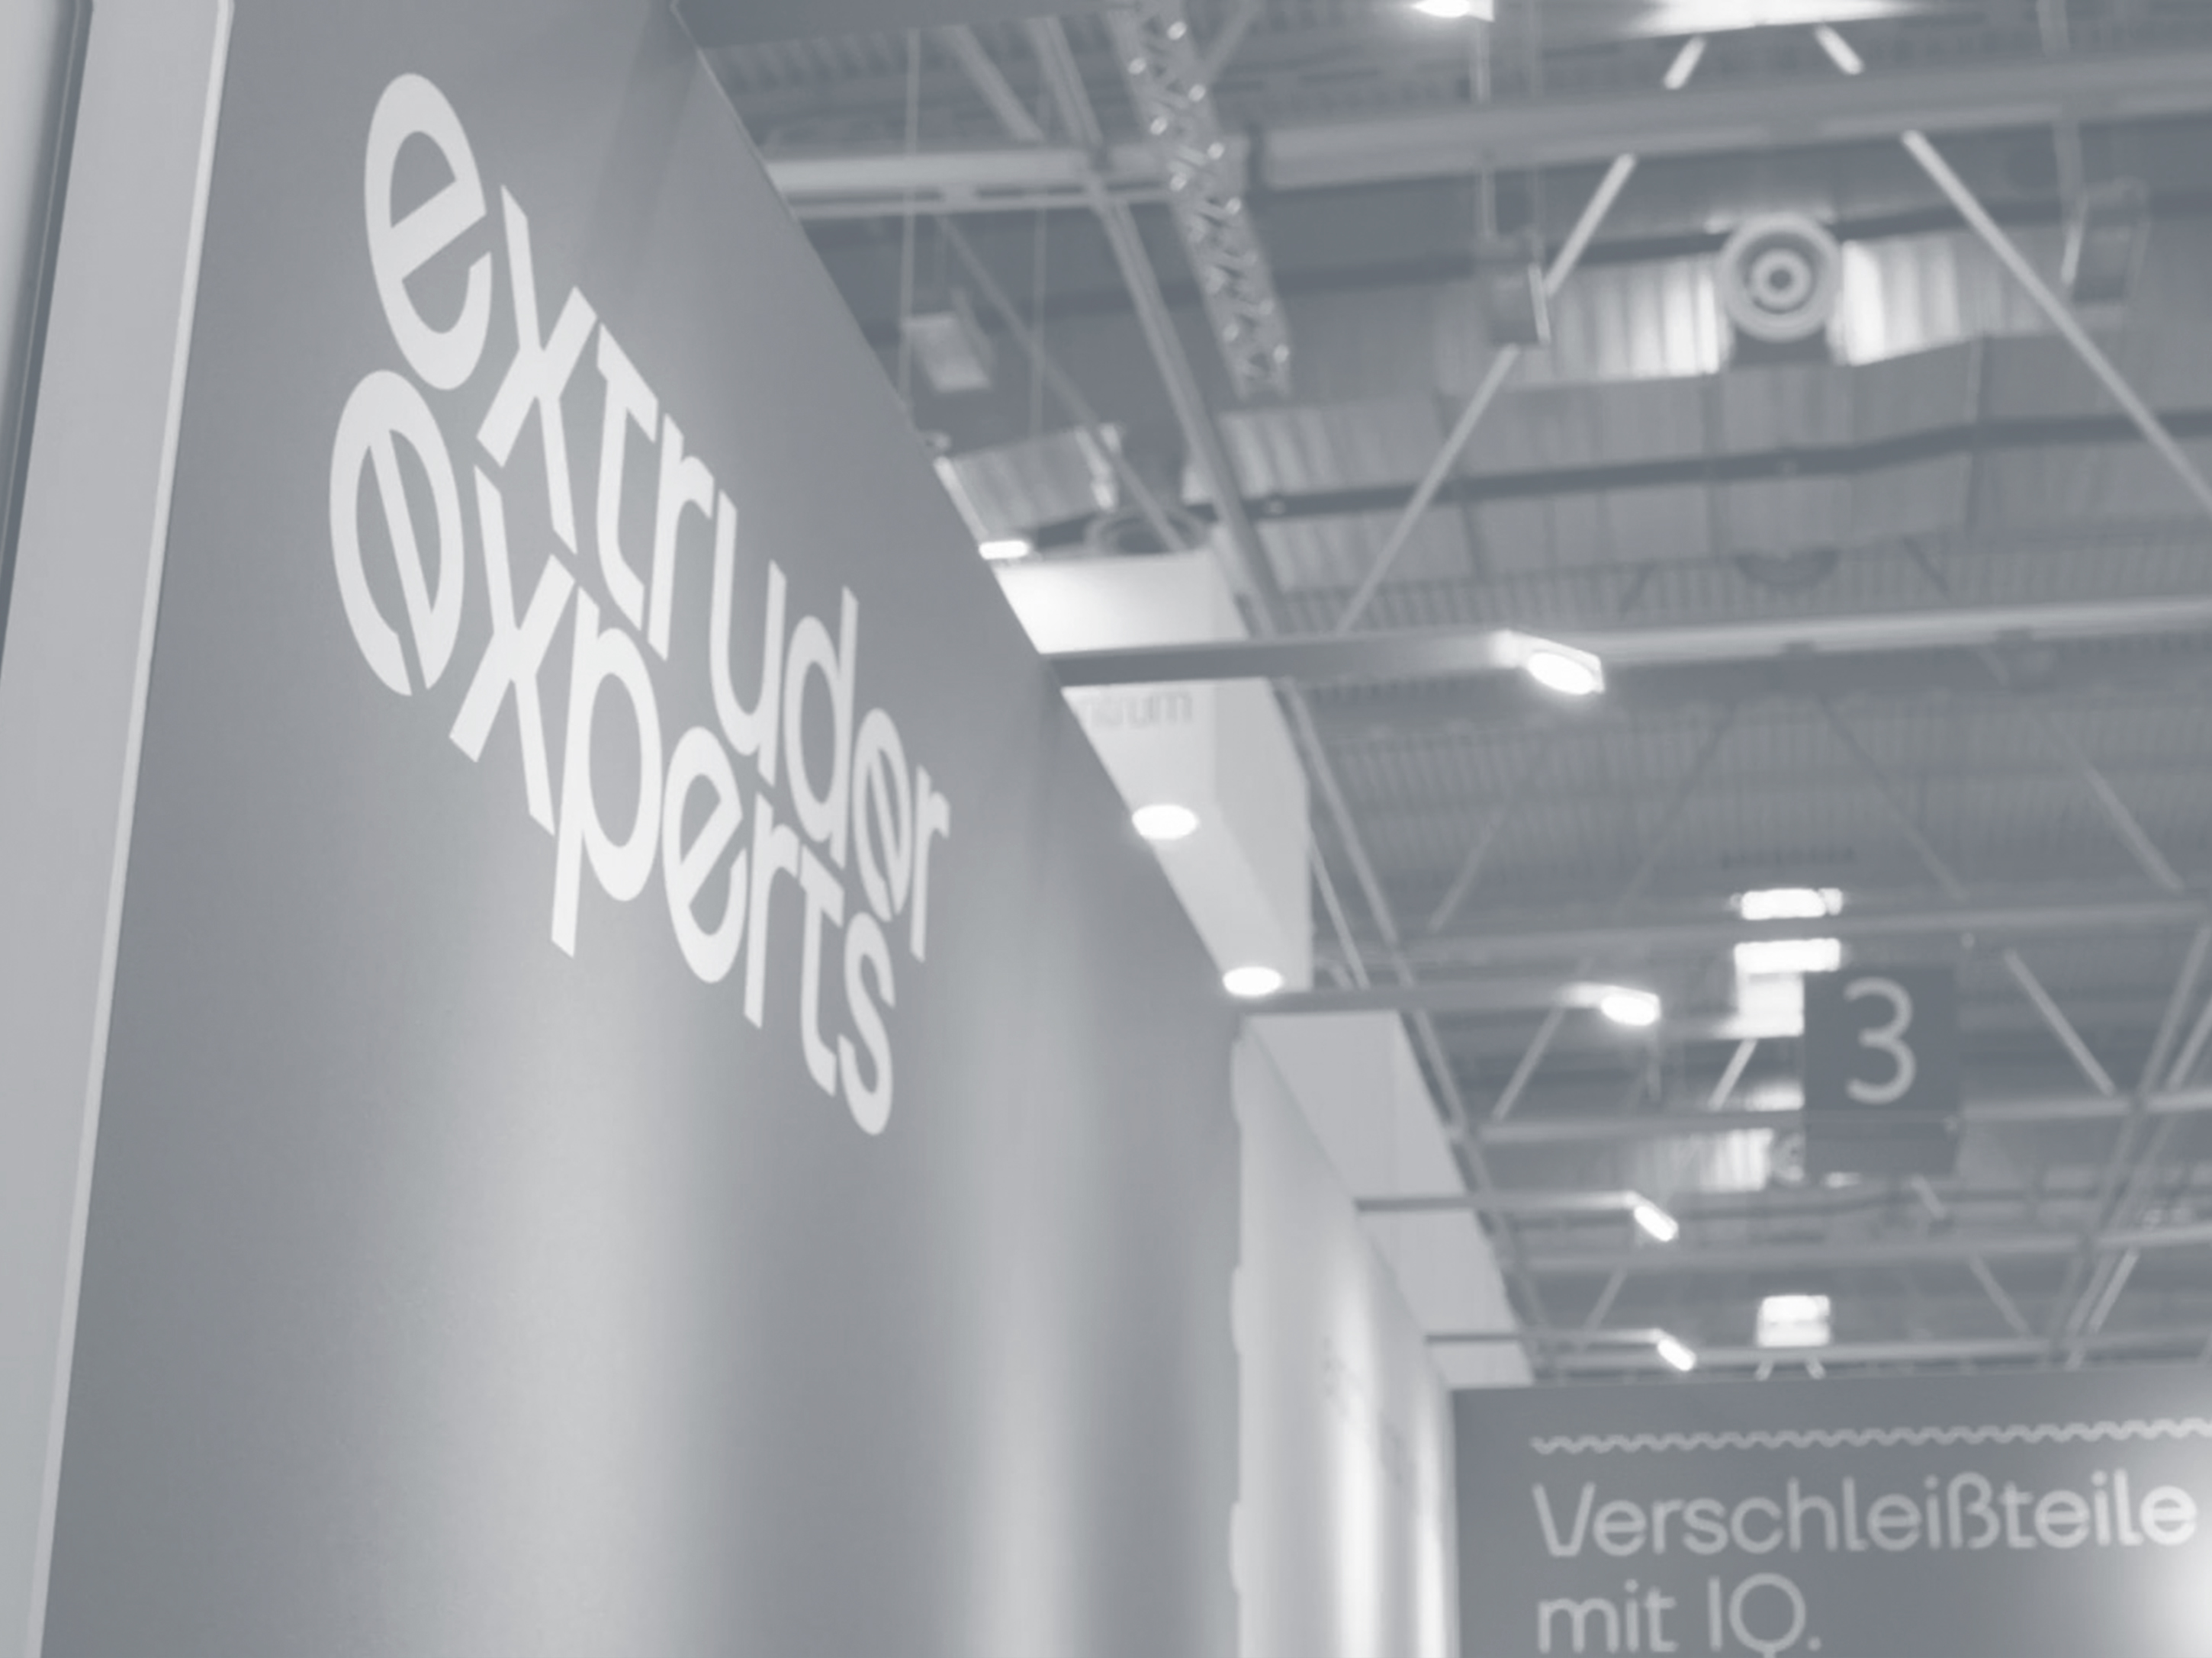 An exhibition wall with the Extruder Experts logo in an exhibition hall.